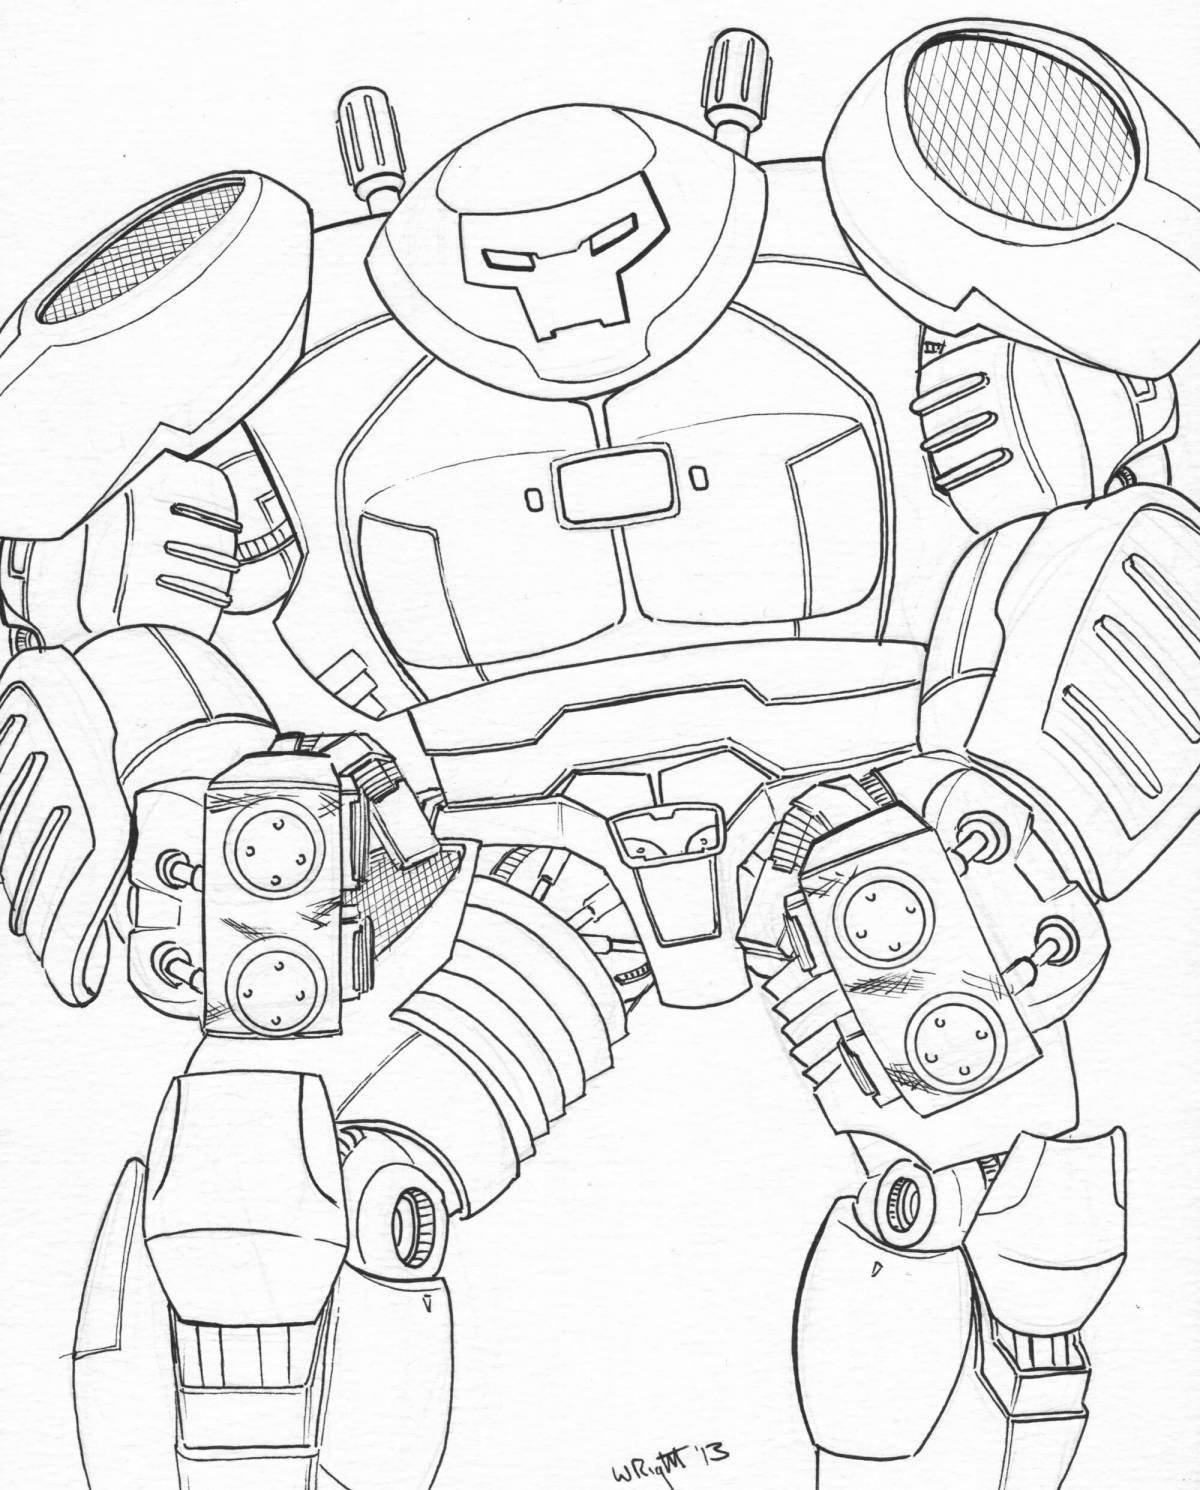 Colorful lego hulk buster coloring page